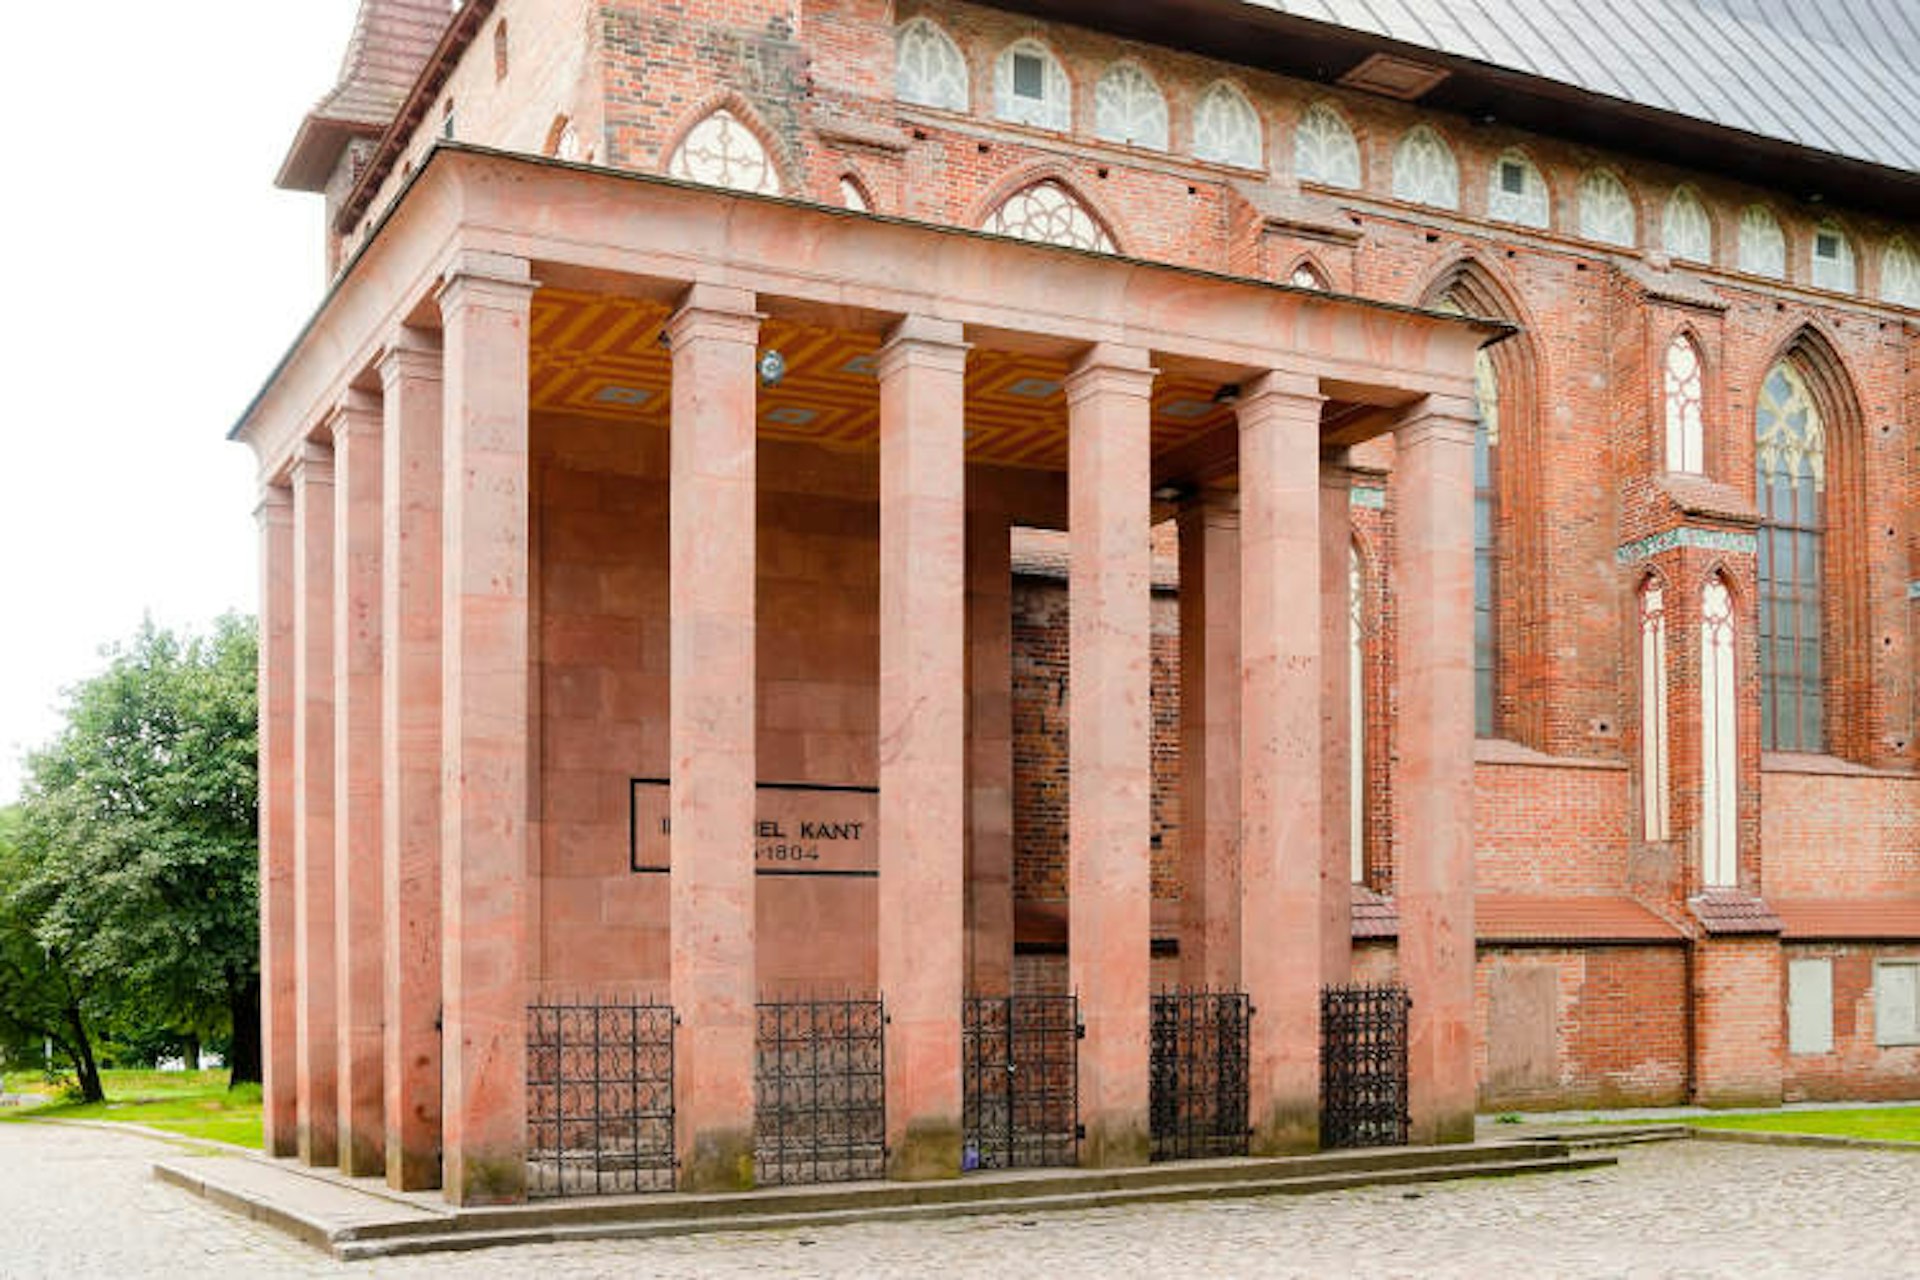 Immanuel Kant’s tomb in Kaliningrad Cathedral. Image by Sergei Butorin / iStock / Getty Images